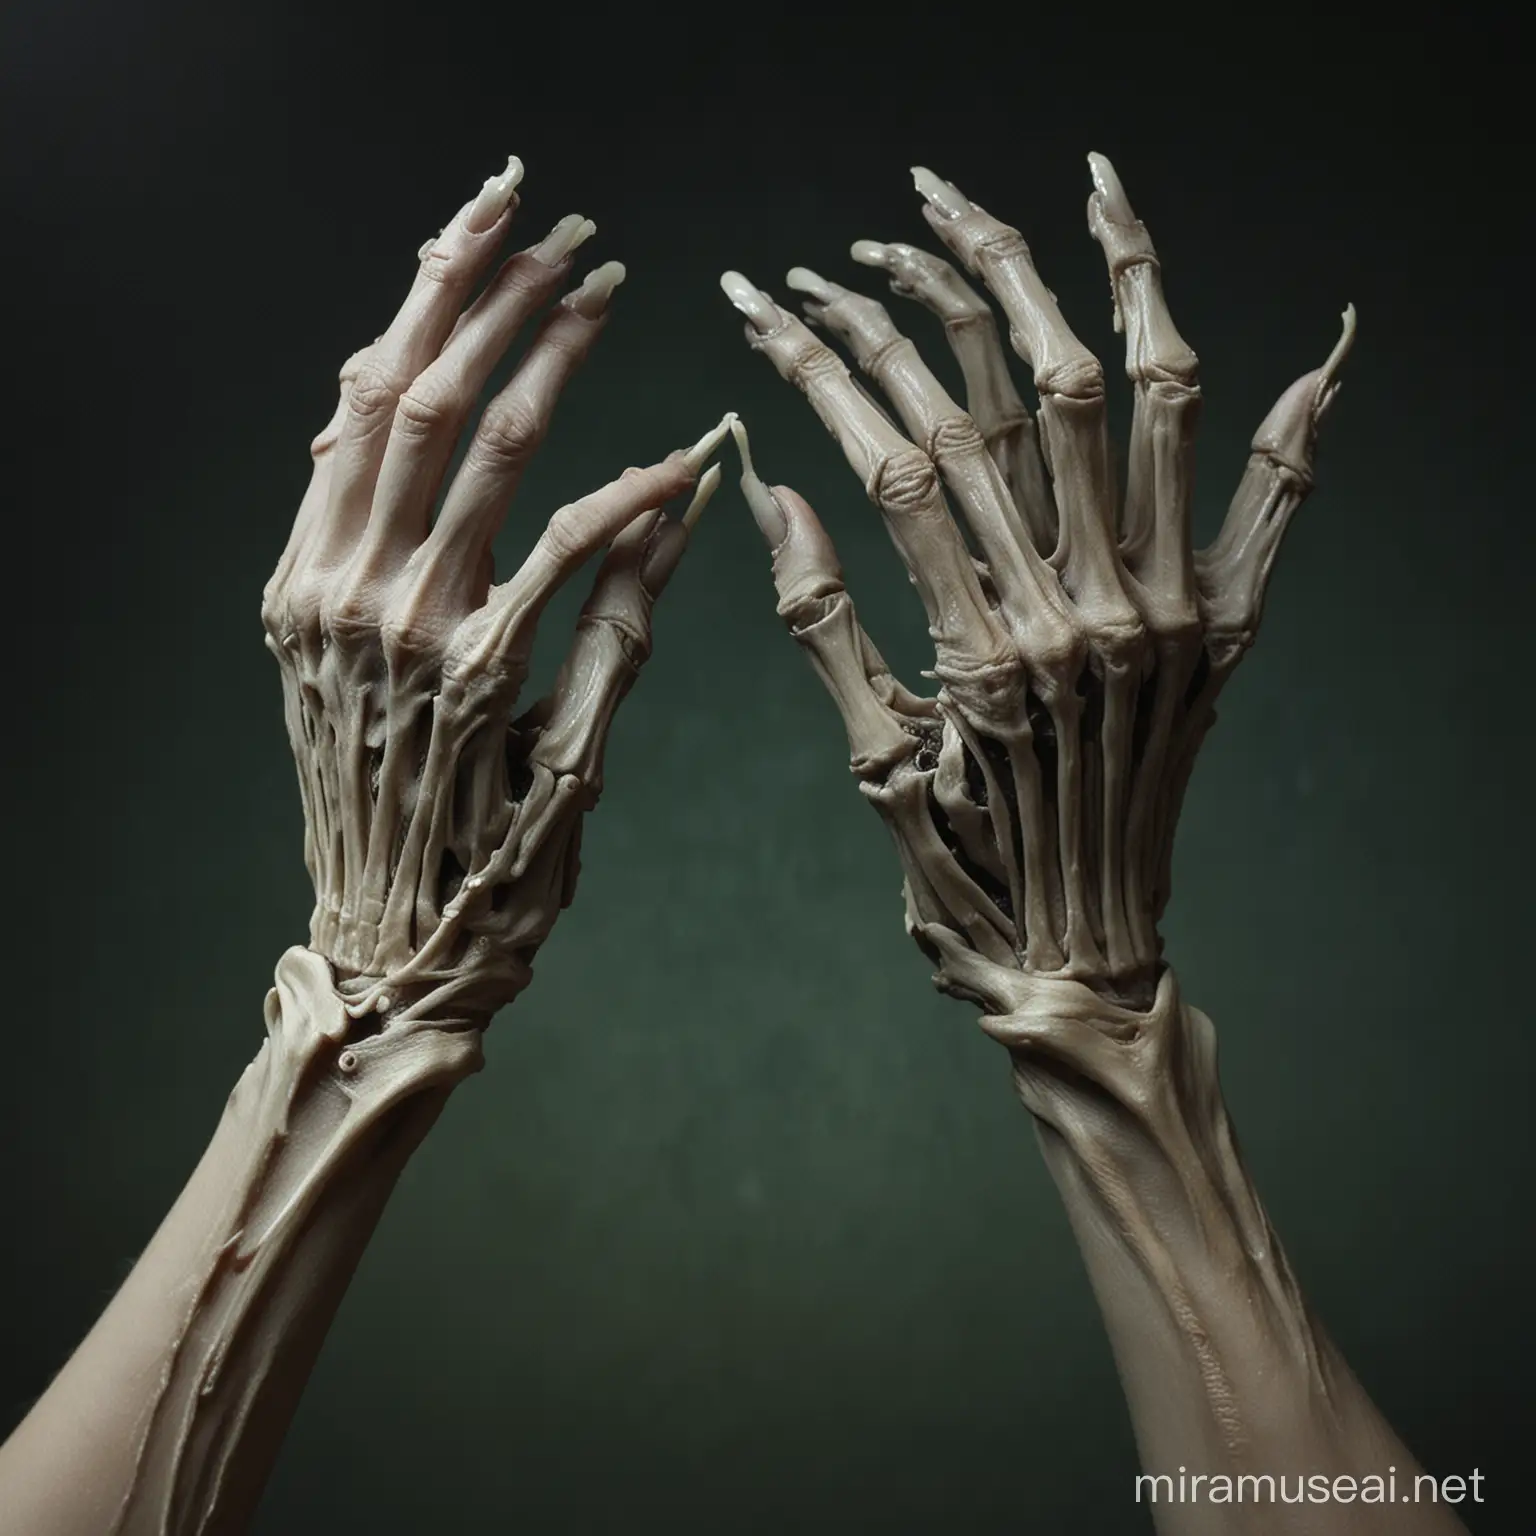 Scene: Close-up on a pair of skeletal hands with long, jagged fingernails. The hands are reaching out from a dark background, palms facing the viewer. The bones are prominent, especially the knuckles, which are stark white. The skin is stretched thin and appears cracked and dry in some areas.

Details:

The hands are trembling slightly, conveying a sense of fear and desperation.
The fingernails are sharp and broken, hinting at a struggle for survival.
Between the hands, barely visible in the darkness, are the faint outlines of a ribcage, emphasizing the emaciated state of the figure.
Color palette:

Use a muted green or blue for the background to create a sense of gloom and unease.
The bones should be a stark white, contrasting with the darker background.
The skin tones can be a sickly yellow or gray, highlighting the character's malnourishment.
Additional notes:

Keep the composition simple and focus on the hands and the suggestion of the ribcage.
The icon format benefits from a clear and bold portrayal of the subject.
Ensure the aspect ratio is square to best fit the icon format.